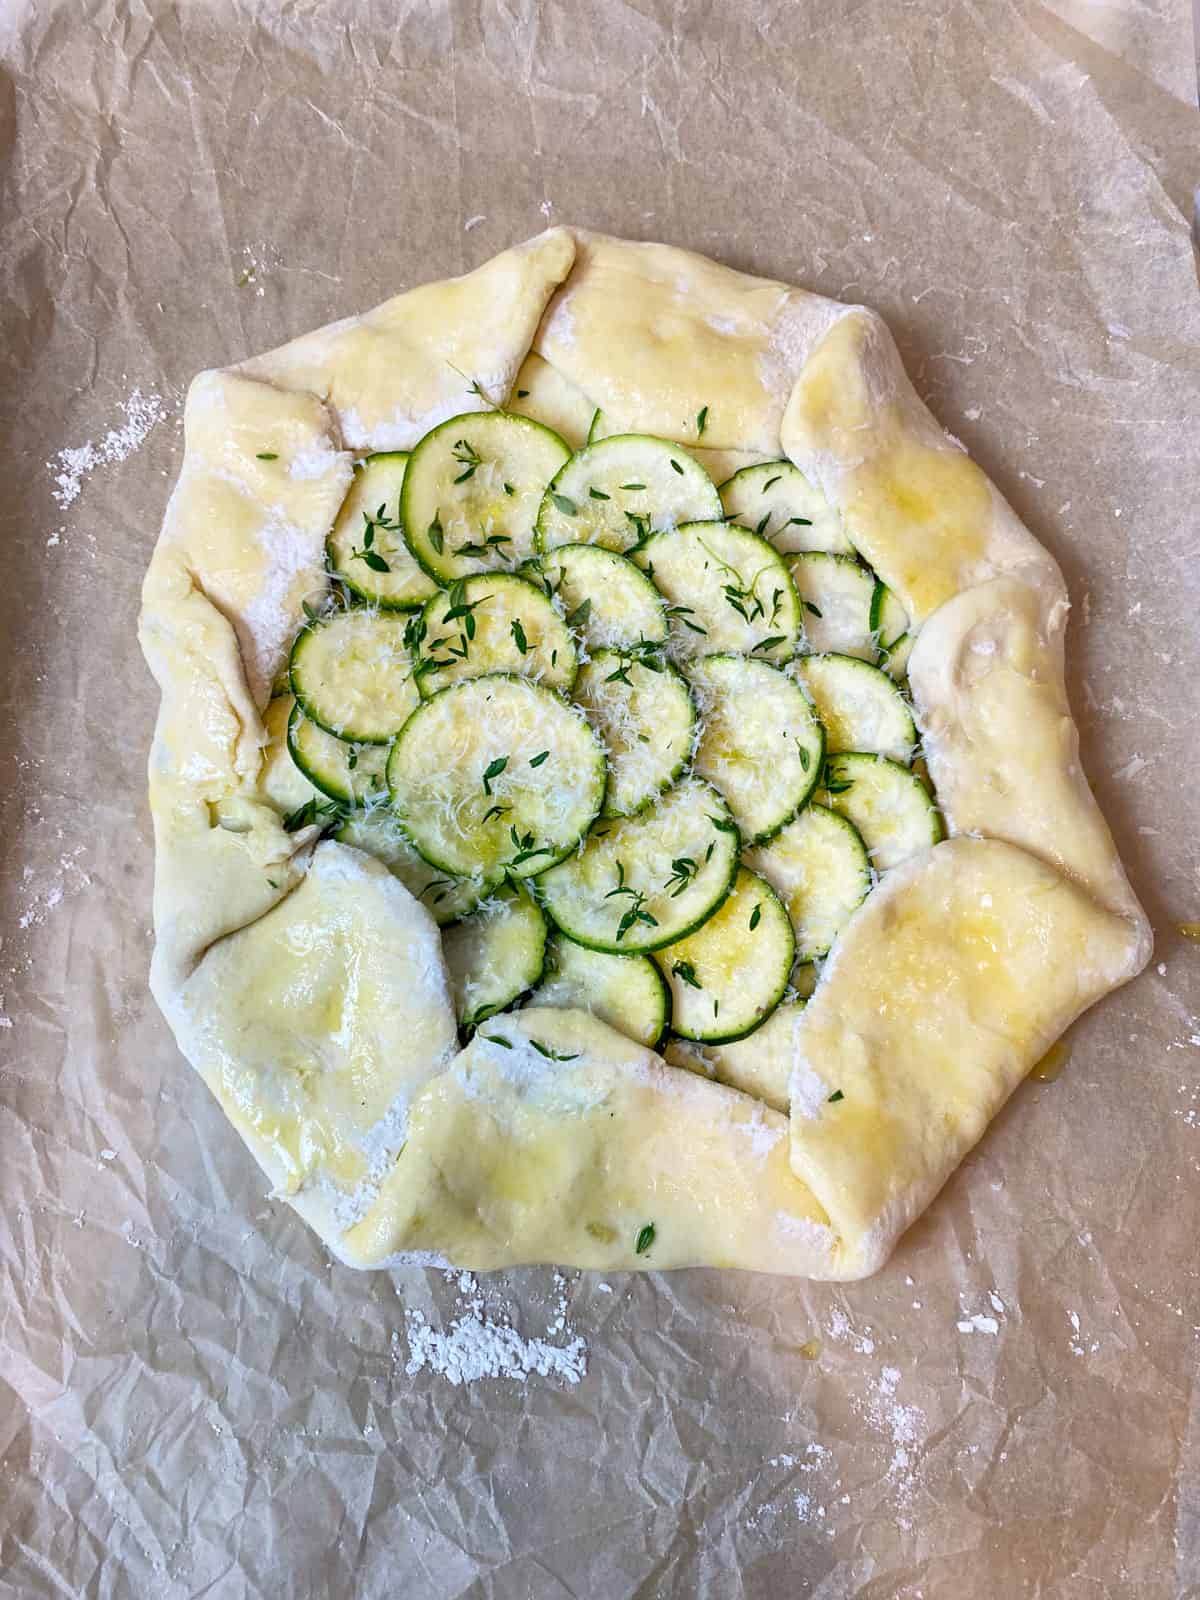 Form the zucchini galette and brush with olive oil and garnish with fresh thyme.